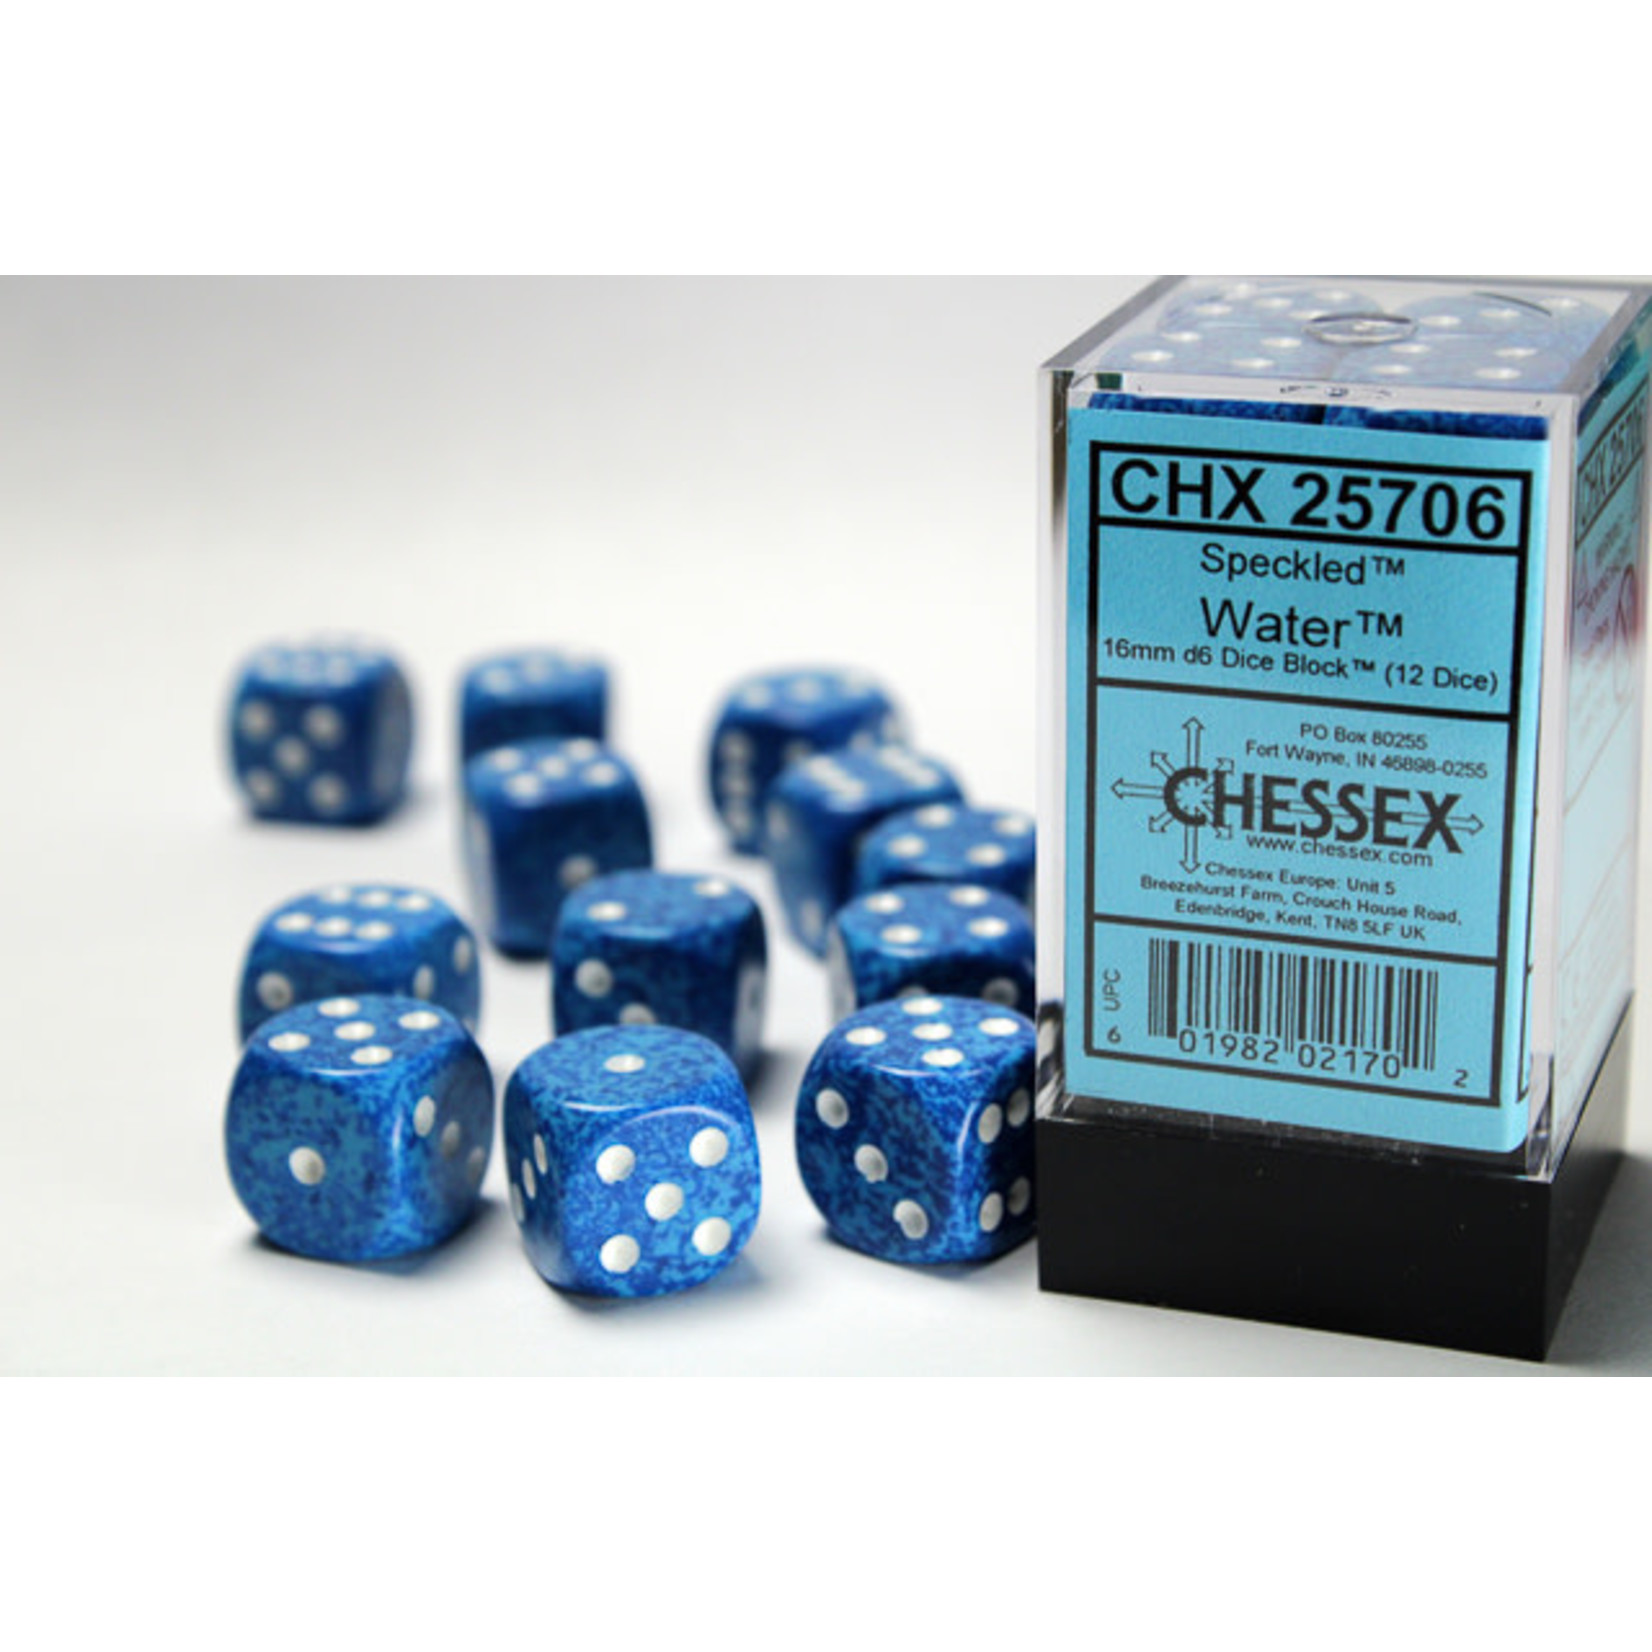 Chessex Dice 16mm 25706 12pc Speckled Water